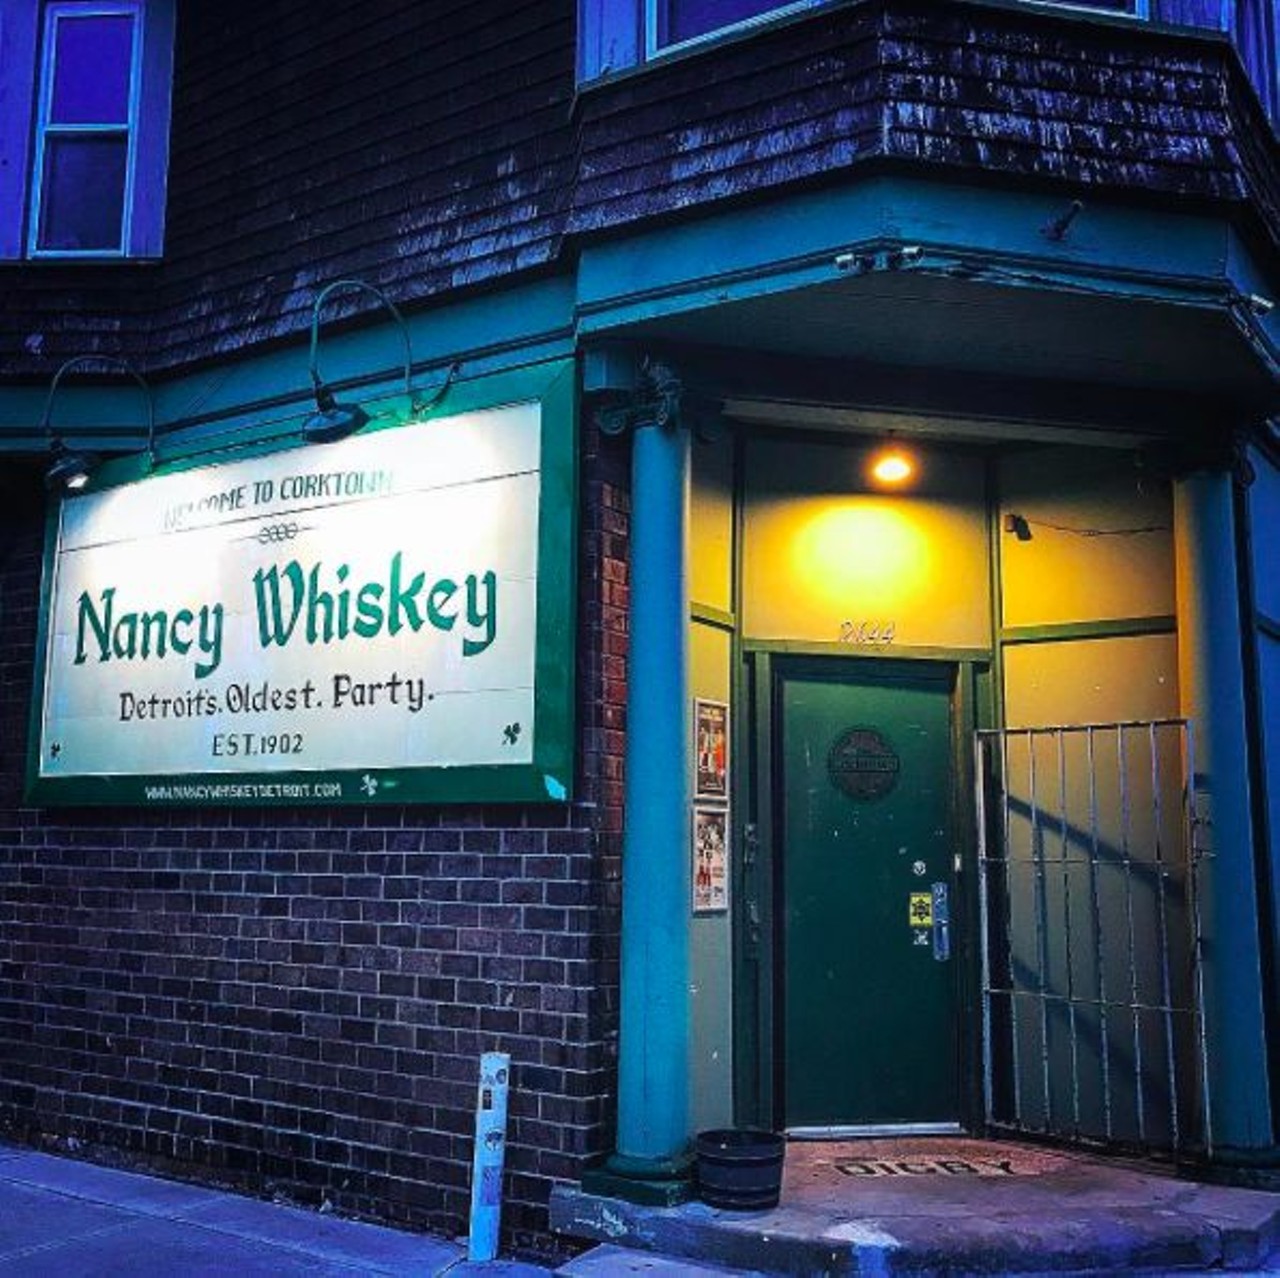 Nancy Whiskey Pub
2644 Harrison St., Detroit
It&#146;s true, this is the oldest party in Detroit. Standing 110 years, this Whiskey Pub features live music on weekends and Whiskey Wednesdays. Get down to this Corktown pub and enjoy a pint. Photo via @campiojr 